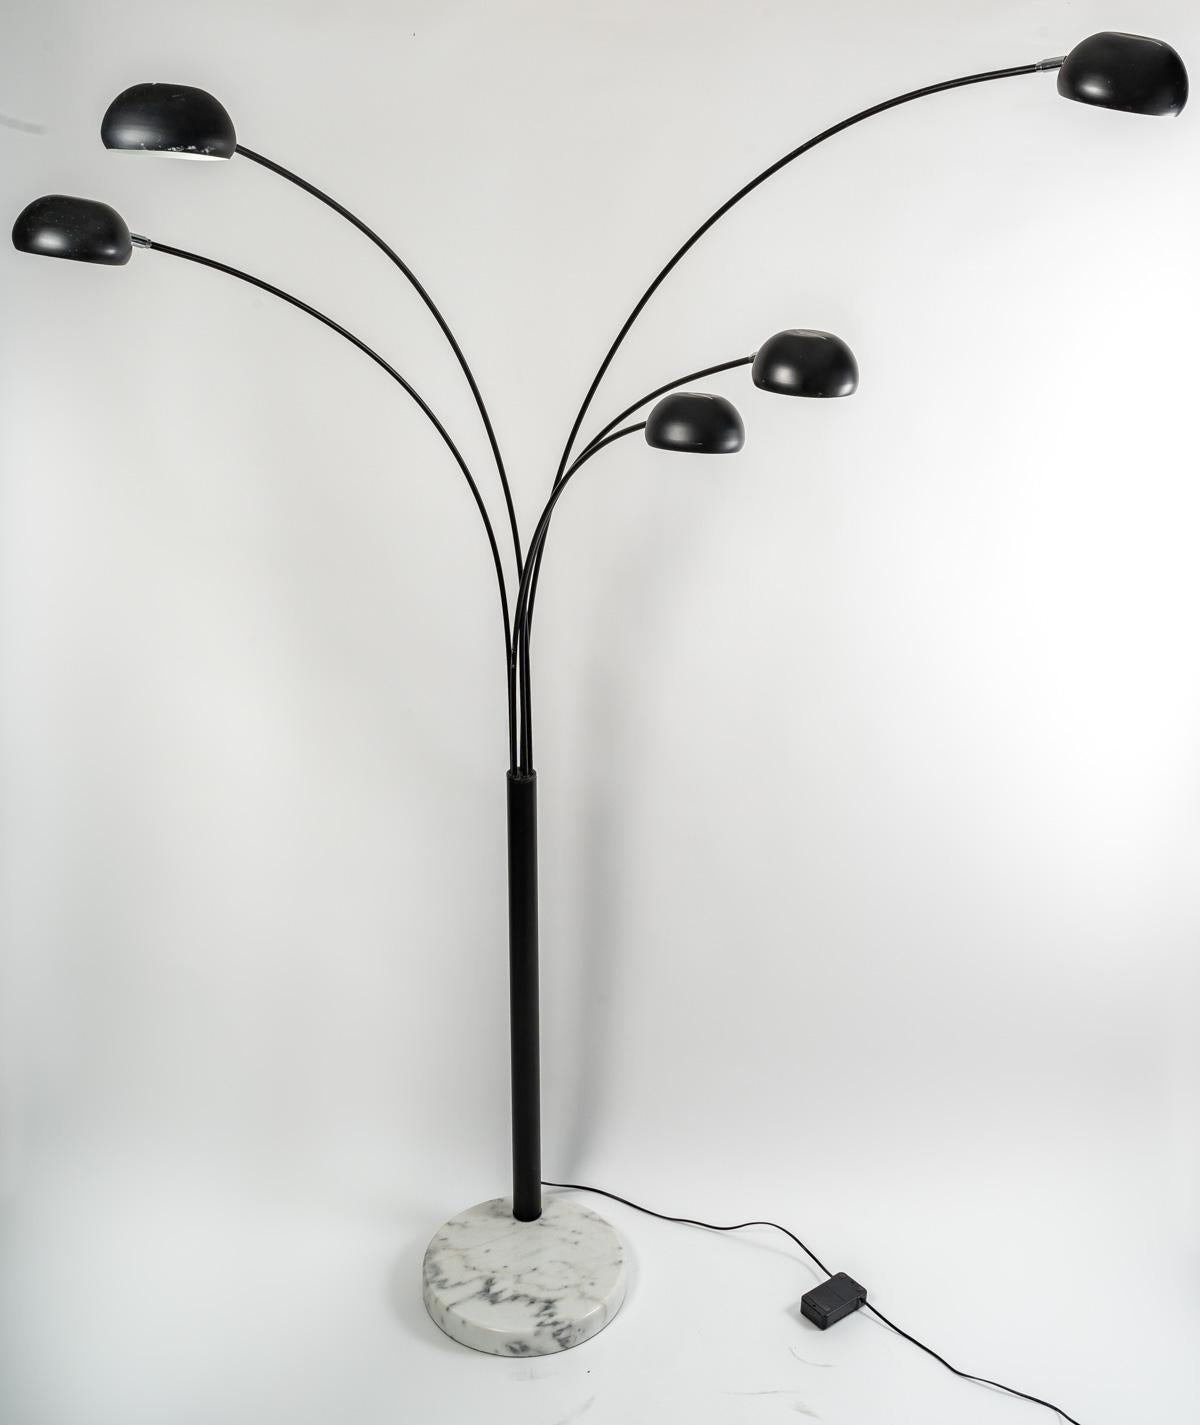 Design lamp from the 1990s in metal and marble base, 5 branches, 5 lights, adjustable.
Measures: H: 210 cm, W: 120 cm, D: 36 cm.